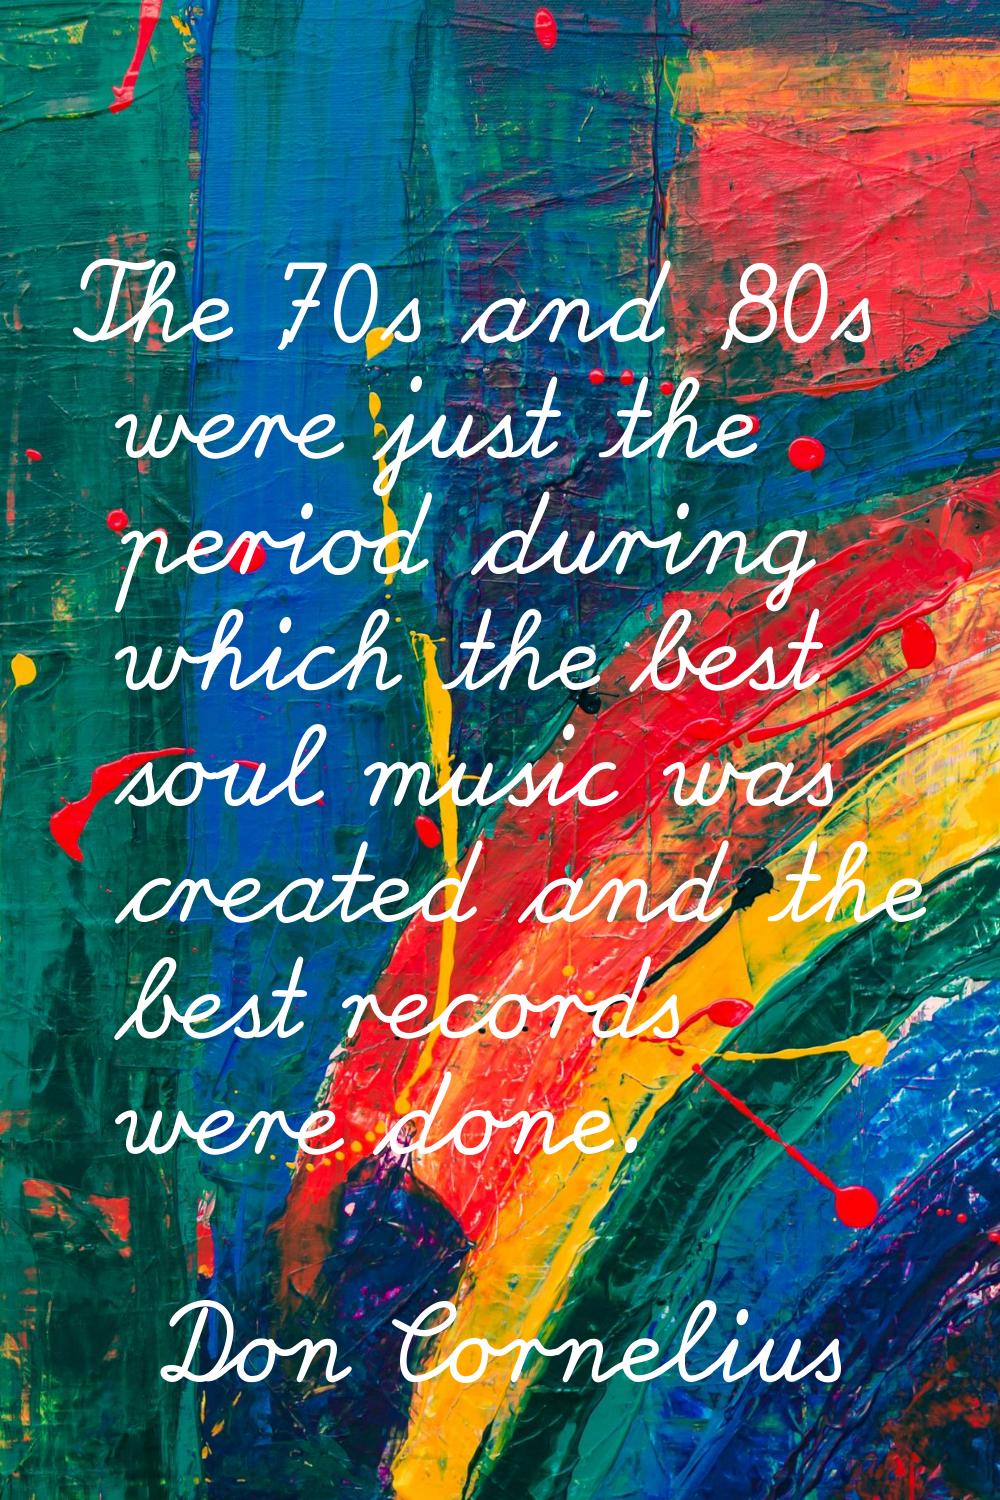 The '70s and '80s were just the period during which the best soul music was created and the best re